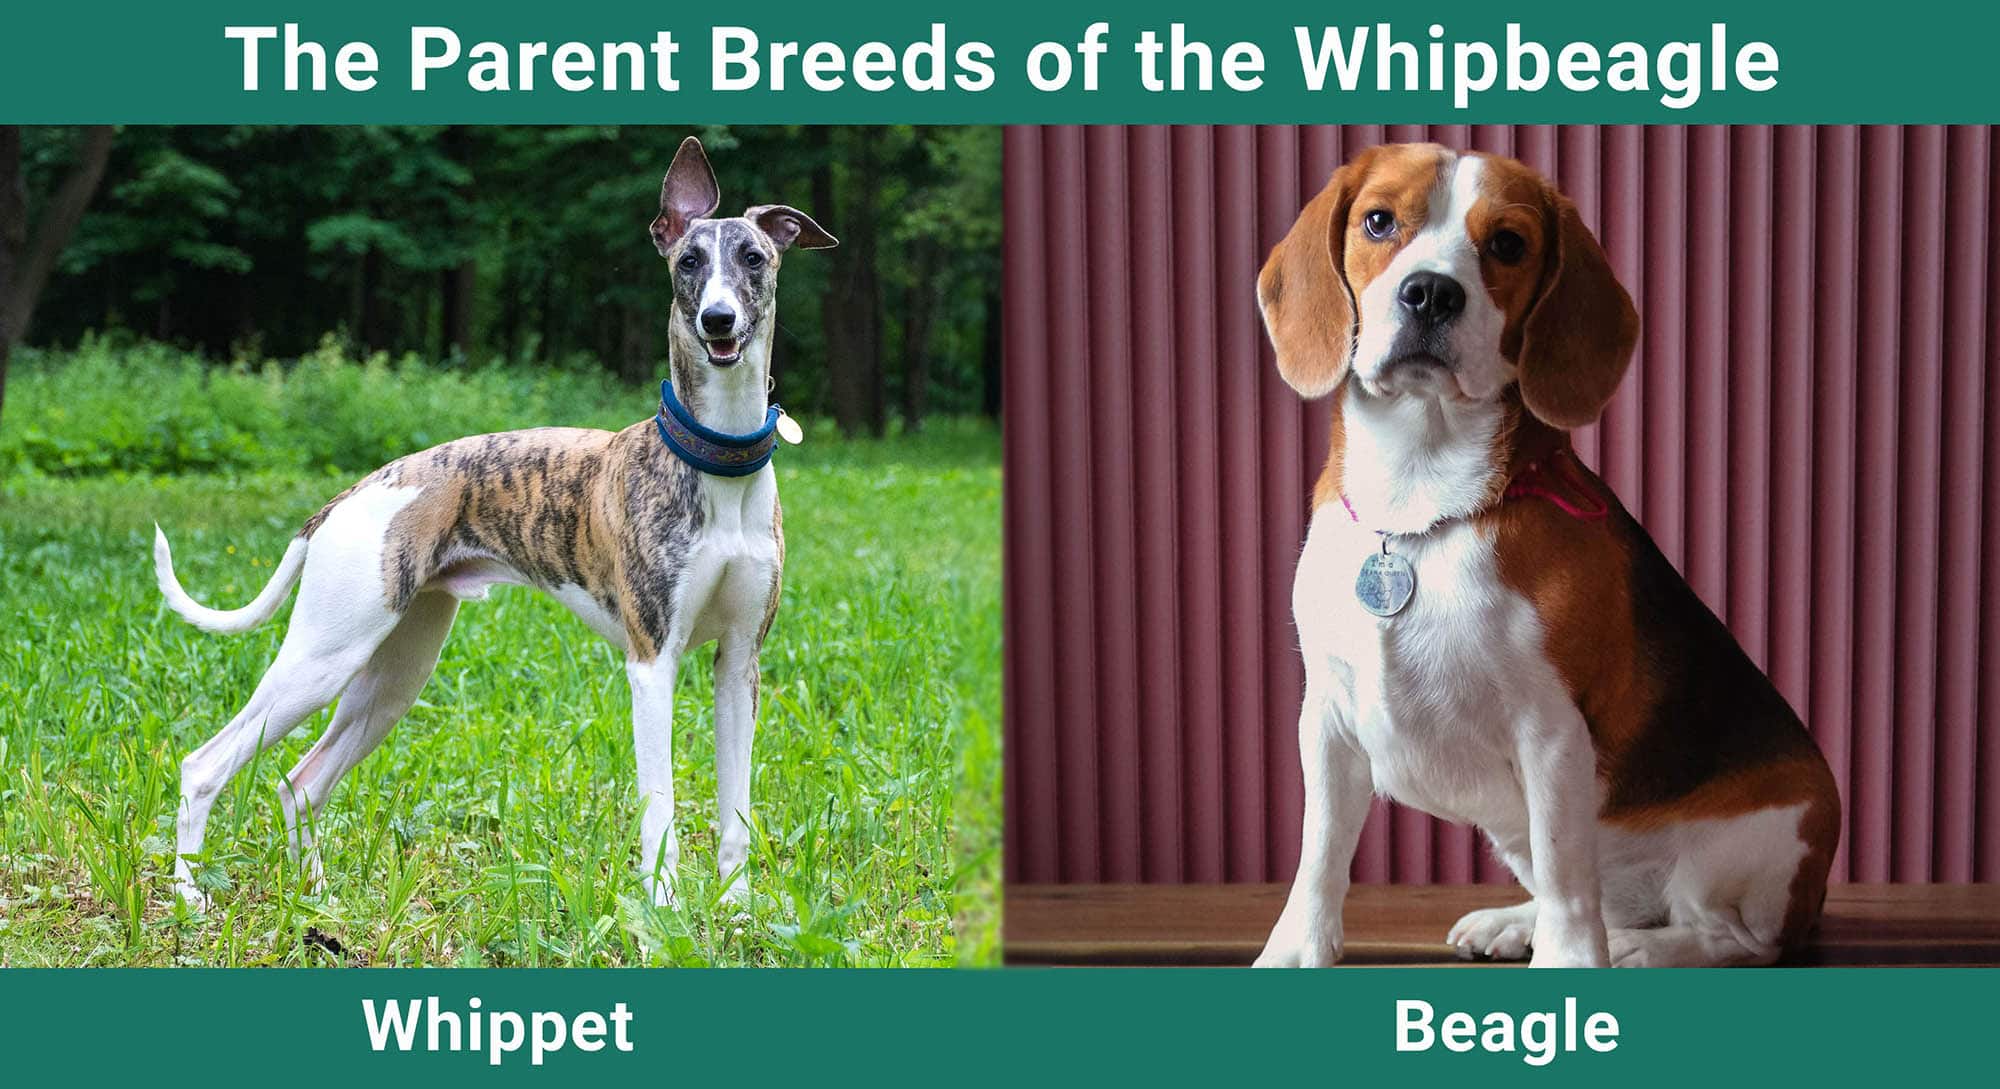 The Parent Breeds of the Whipbeagle